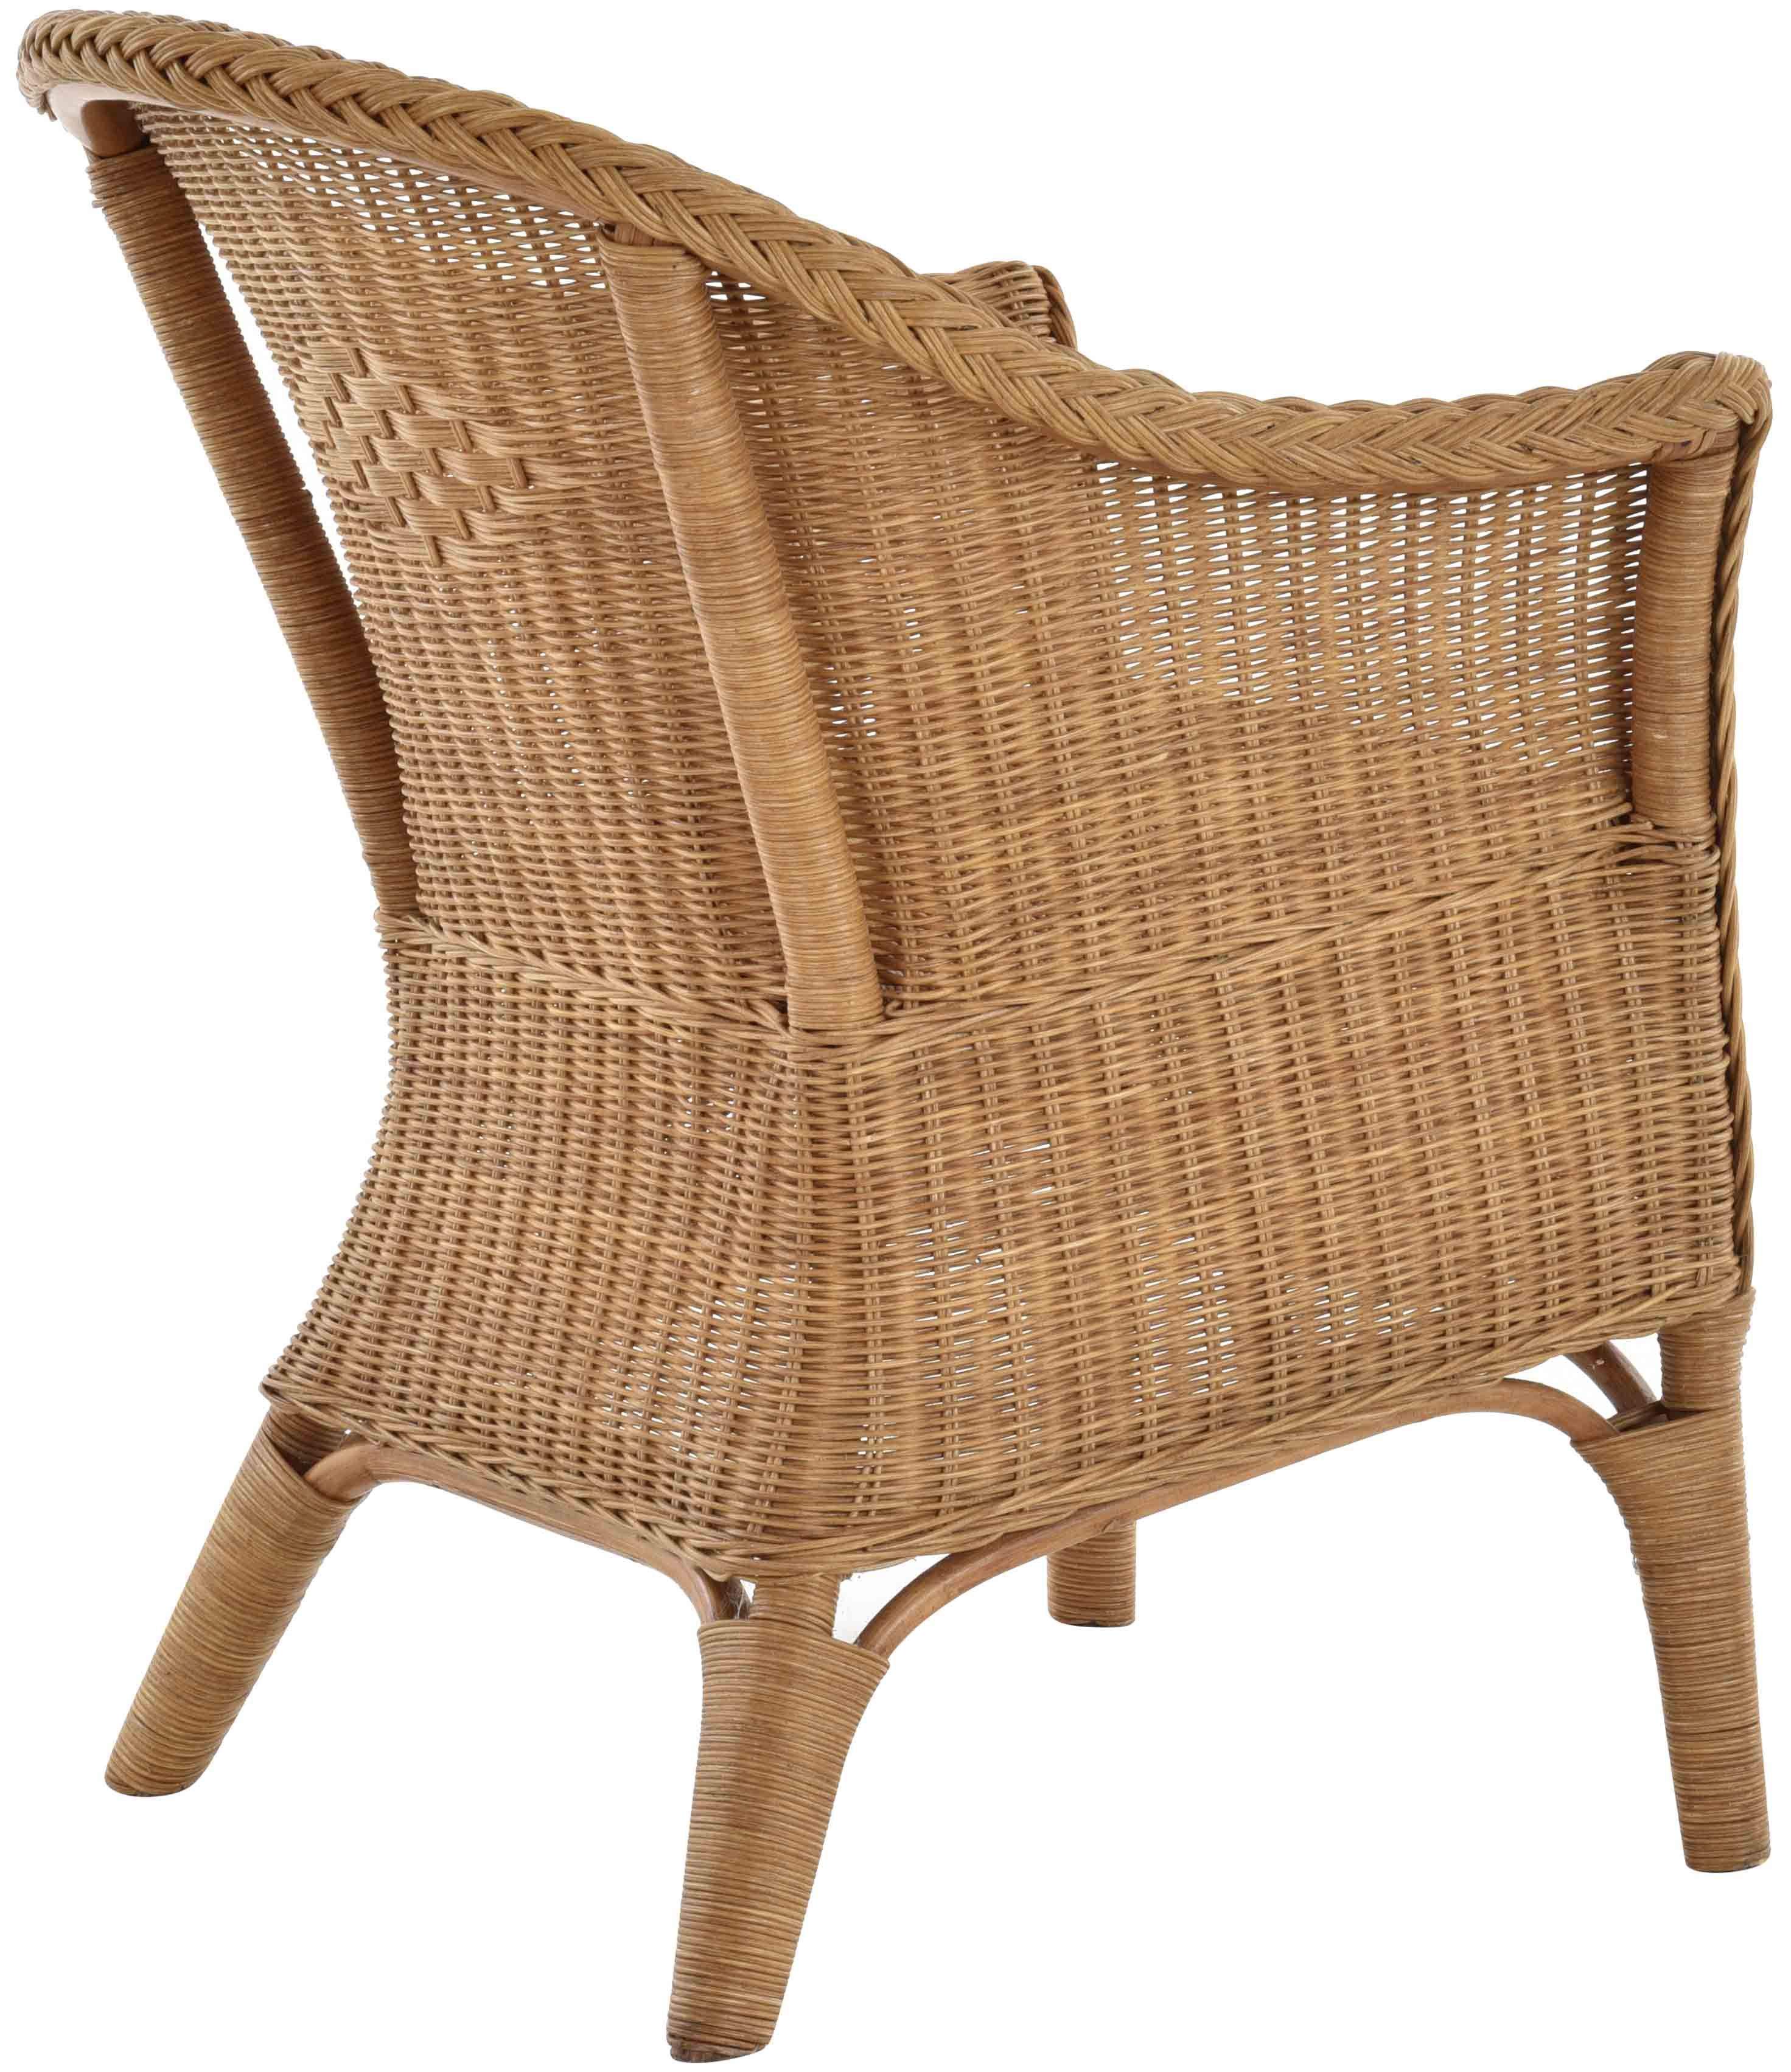 Rattan-Sessel Country